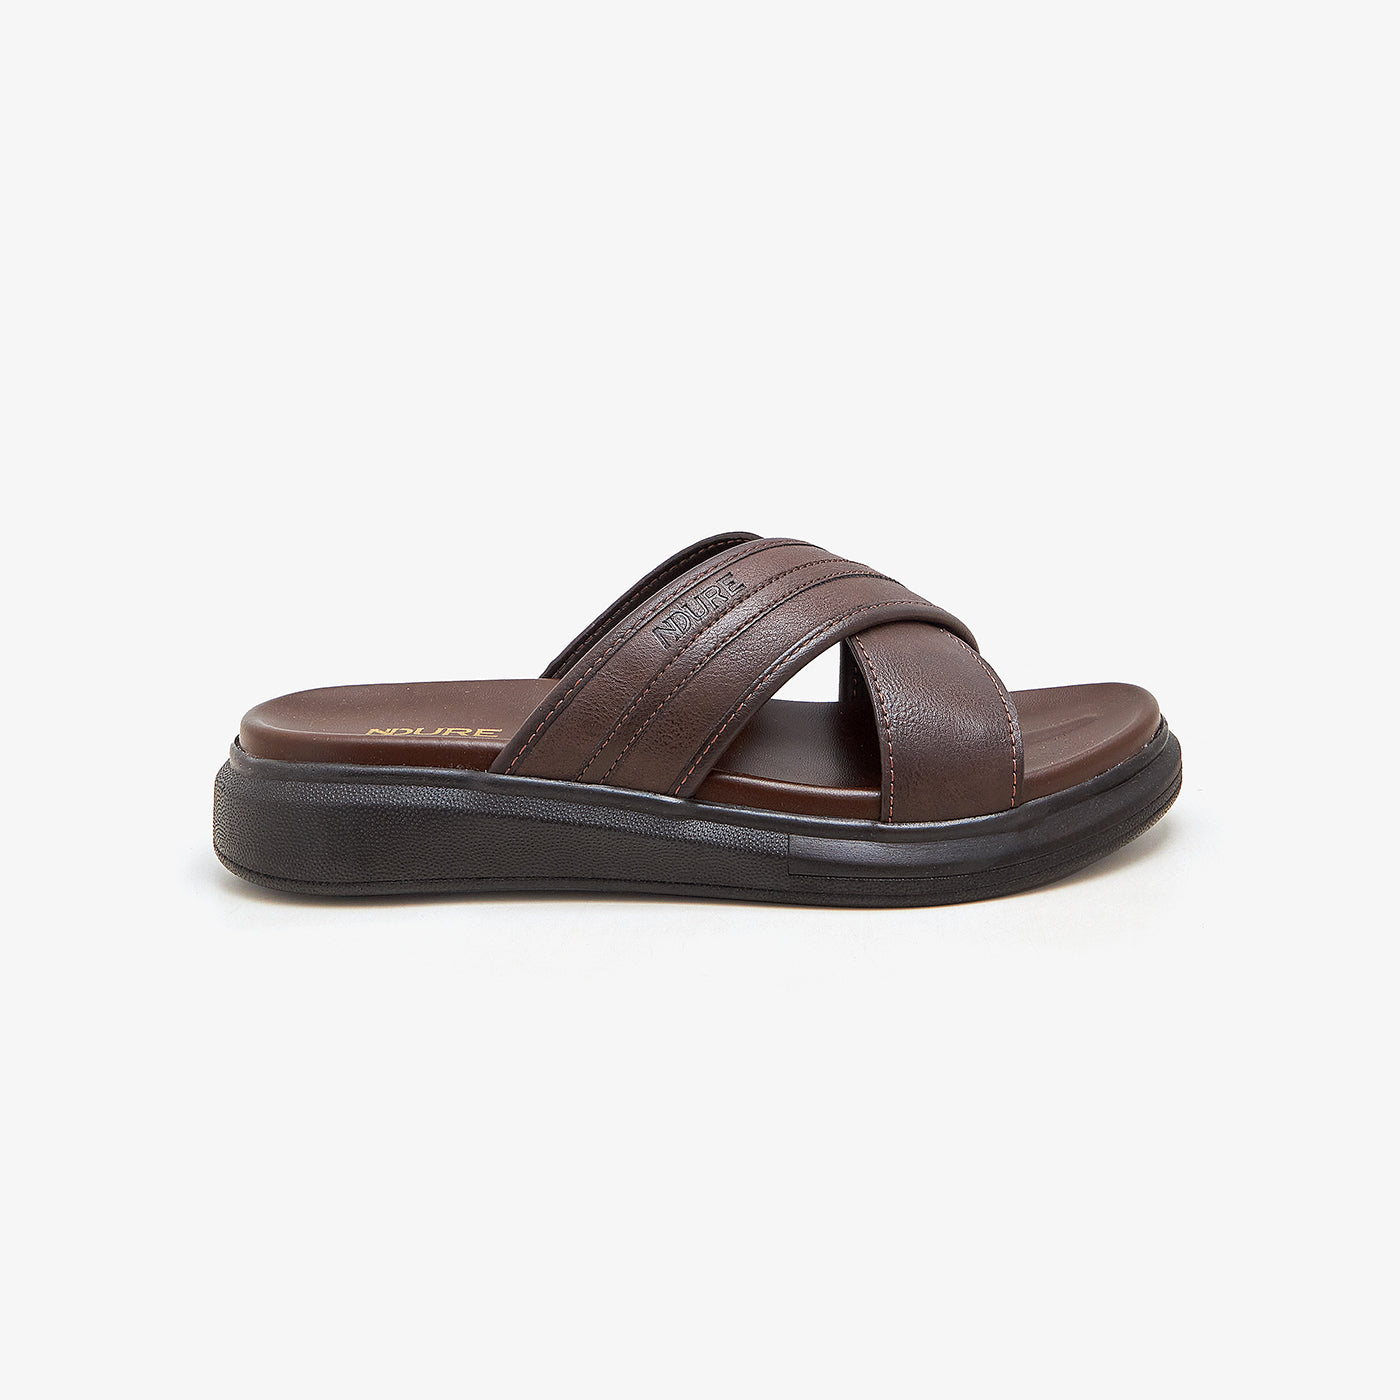 Sophisticated Men's Chappals